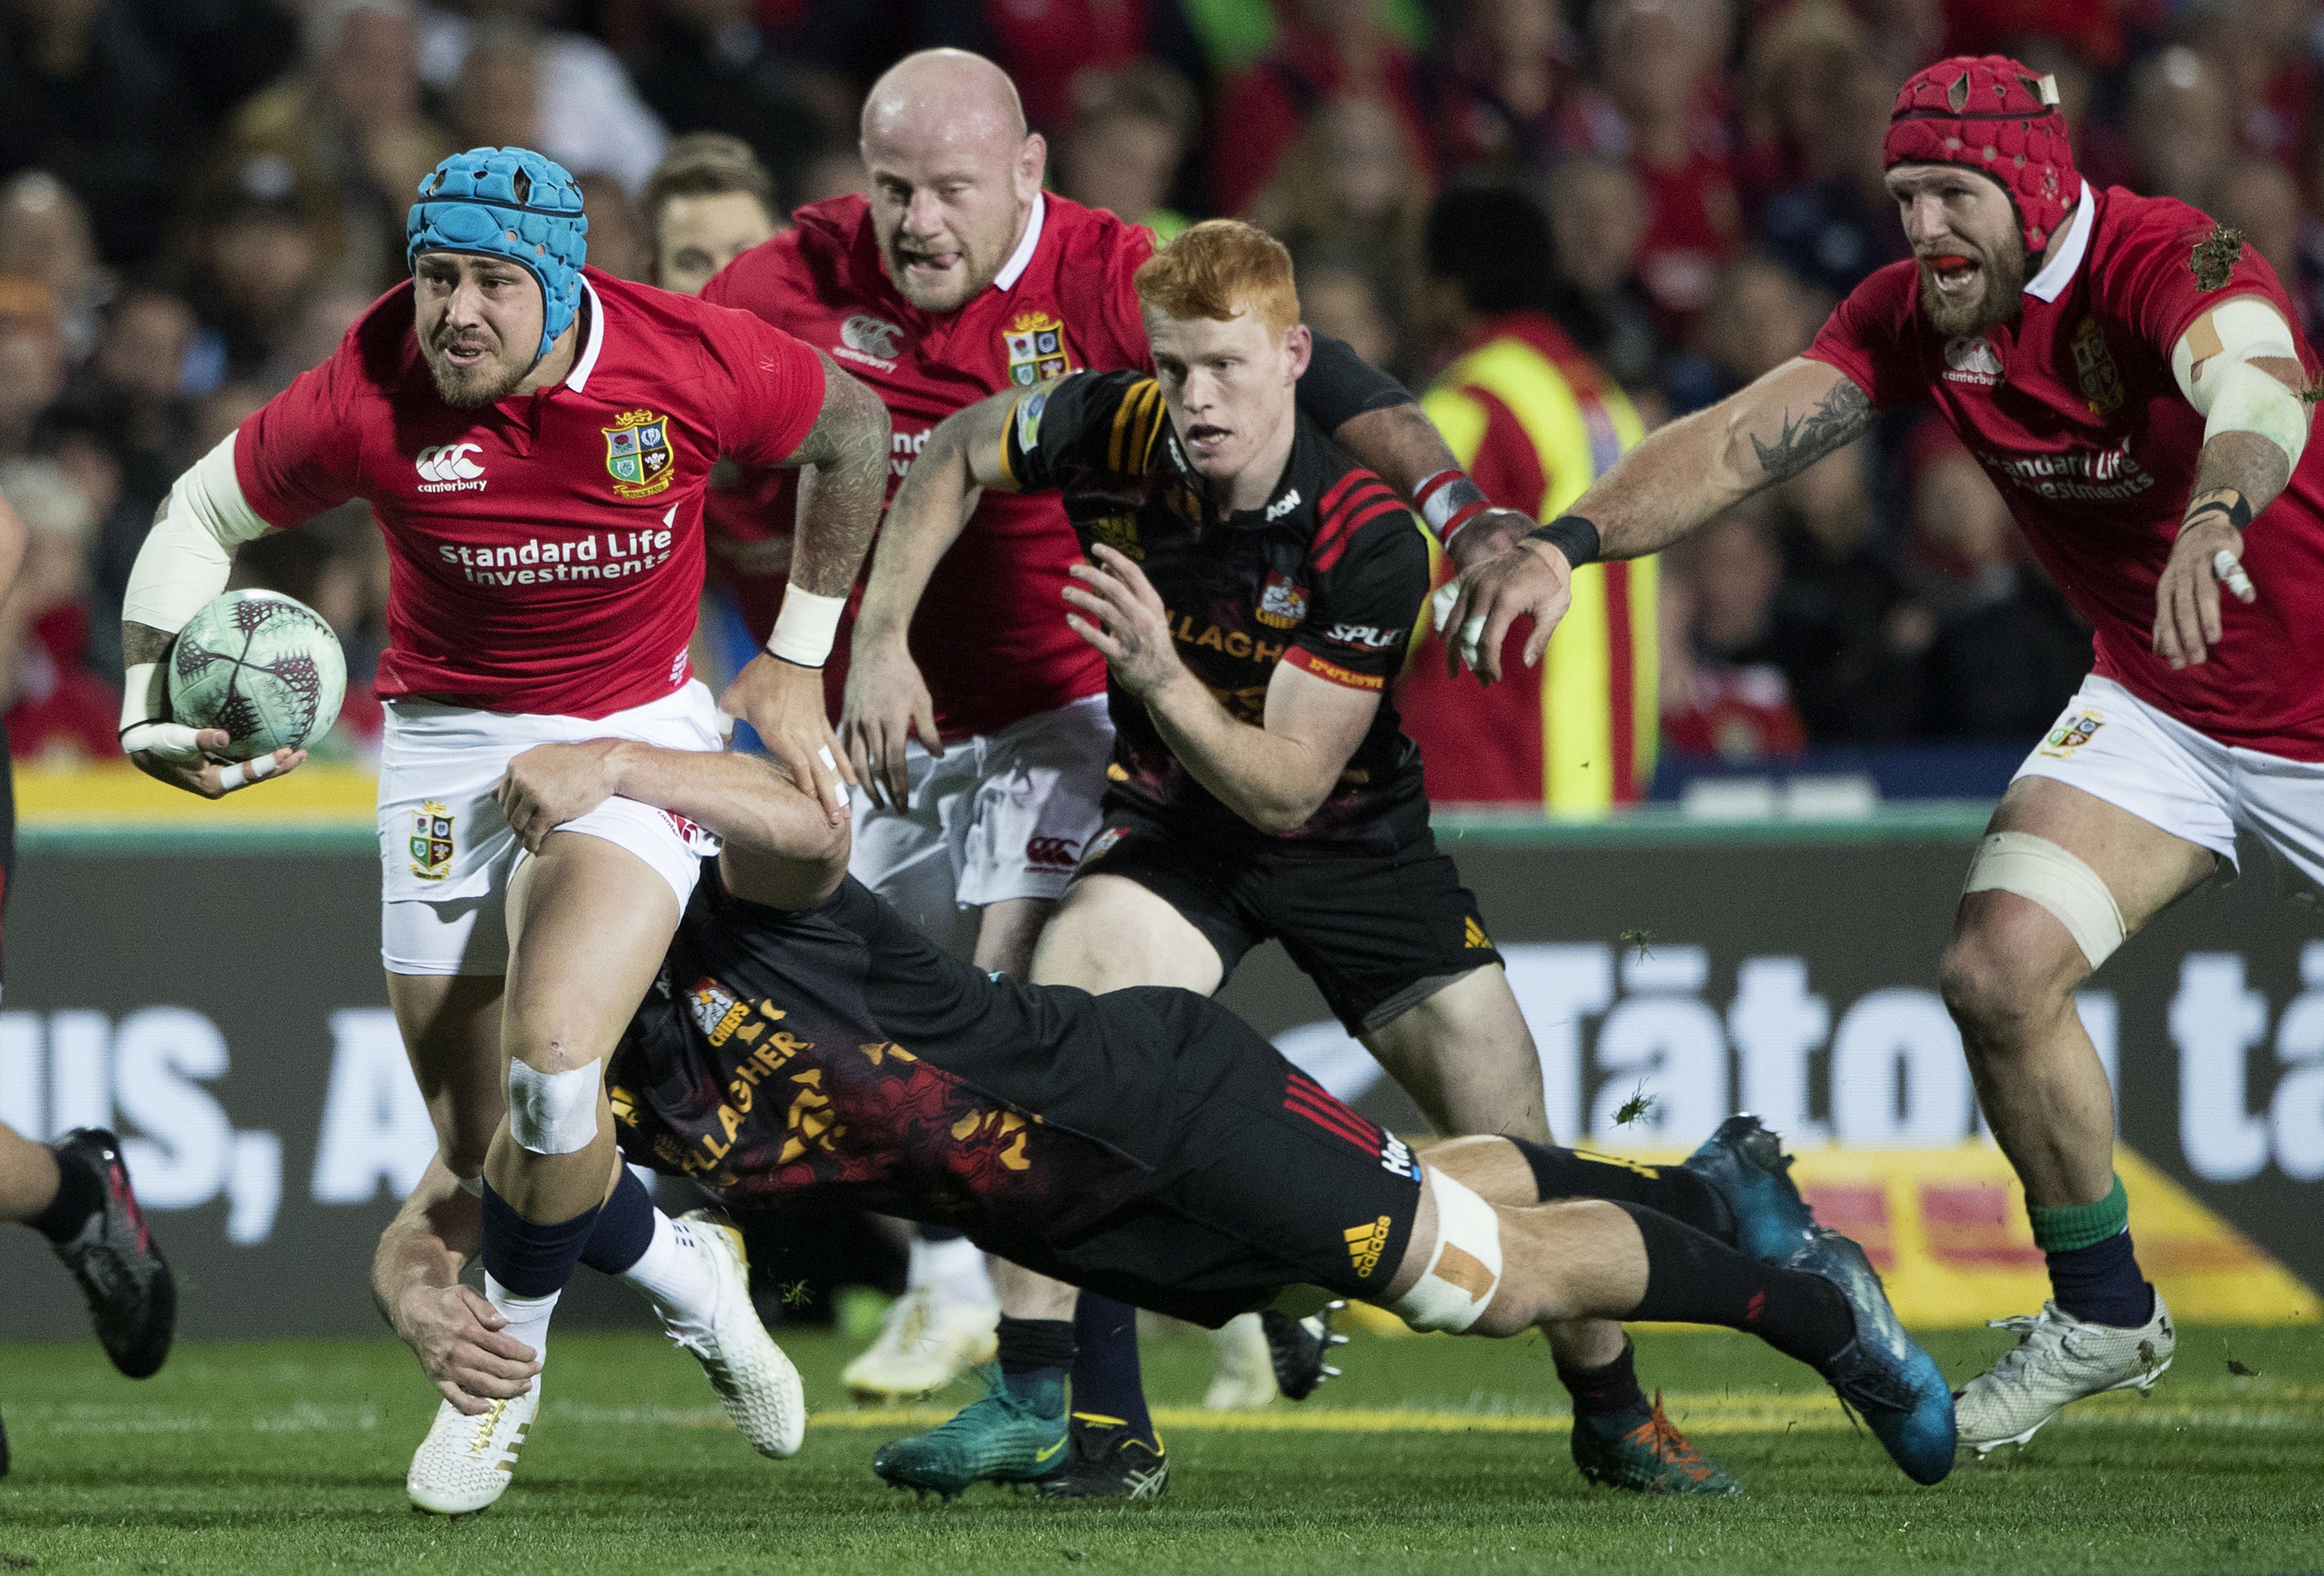 British & Irish Lions winger Jack Nowell (left) makes a break during their game against the Chiefs at Waikato Stadium in Hamilton, New Zealand. Photo: AP